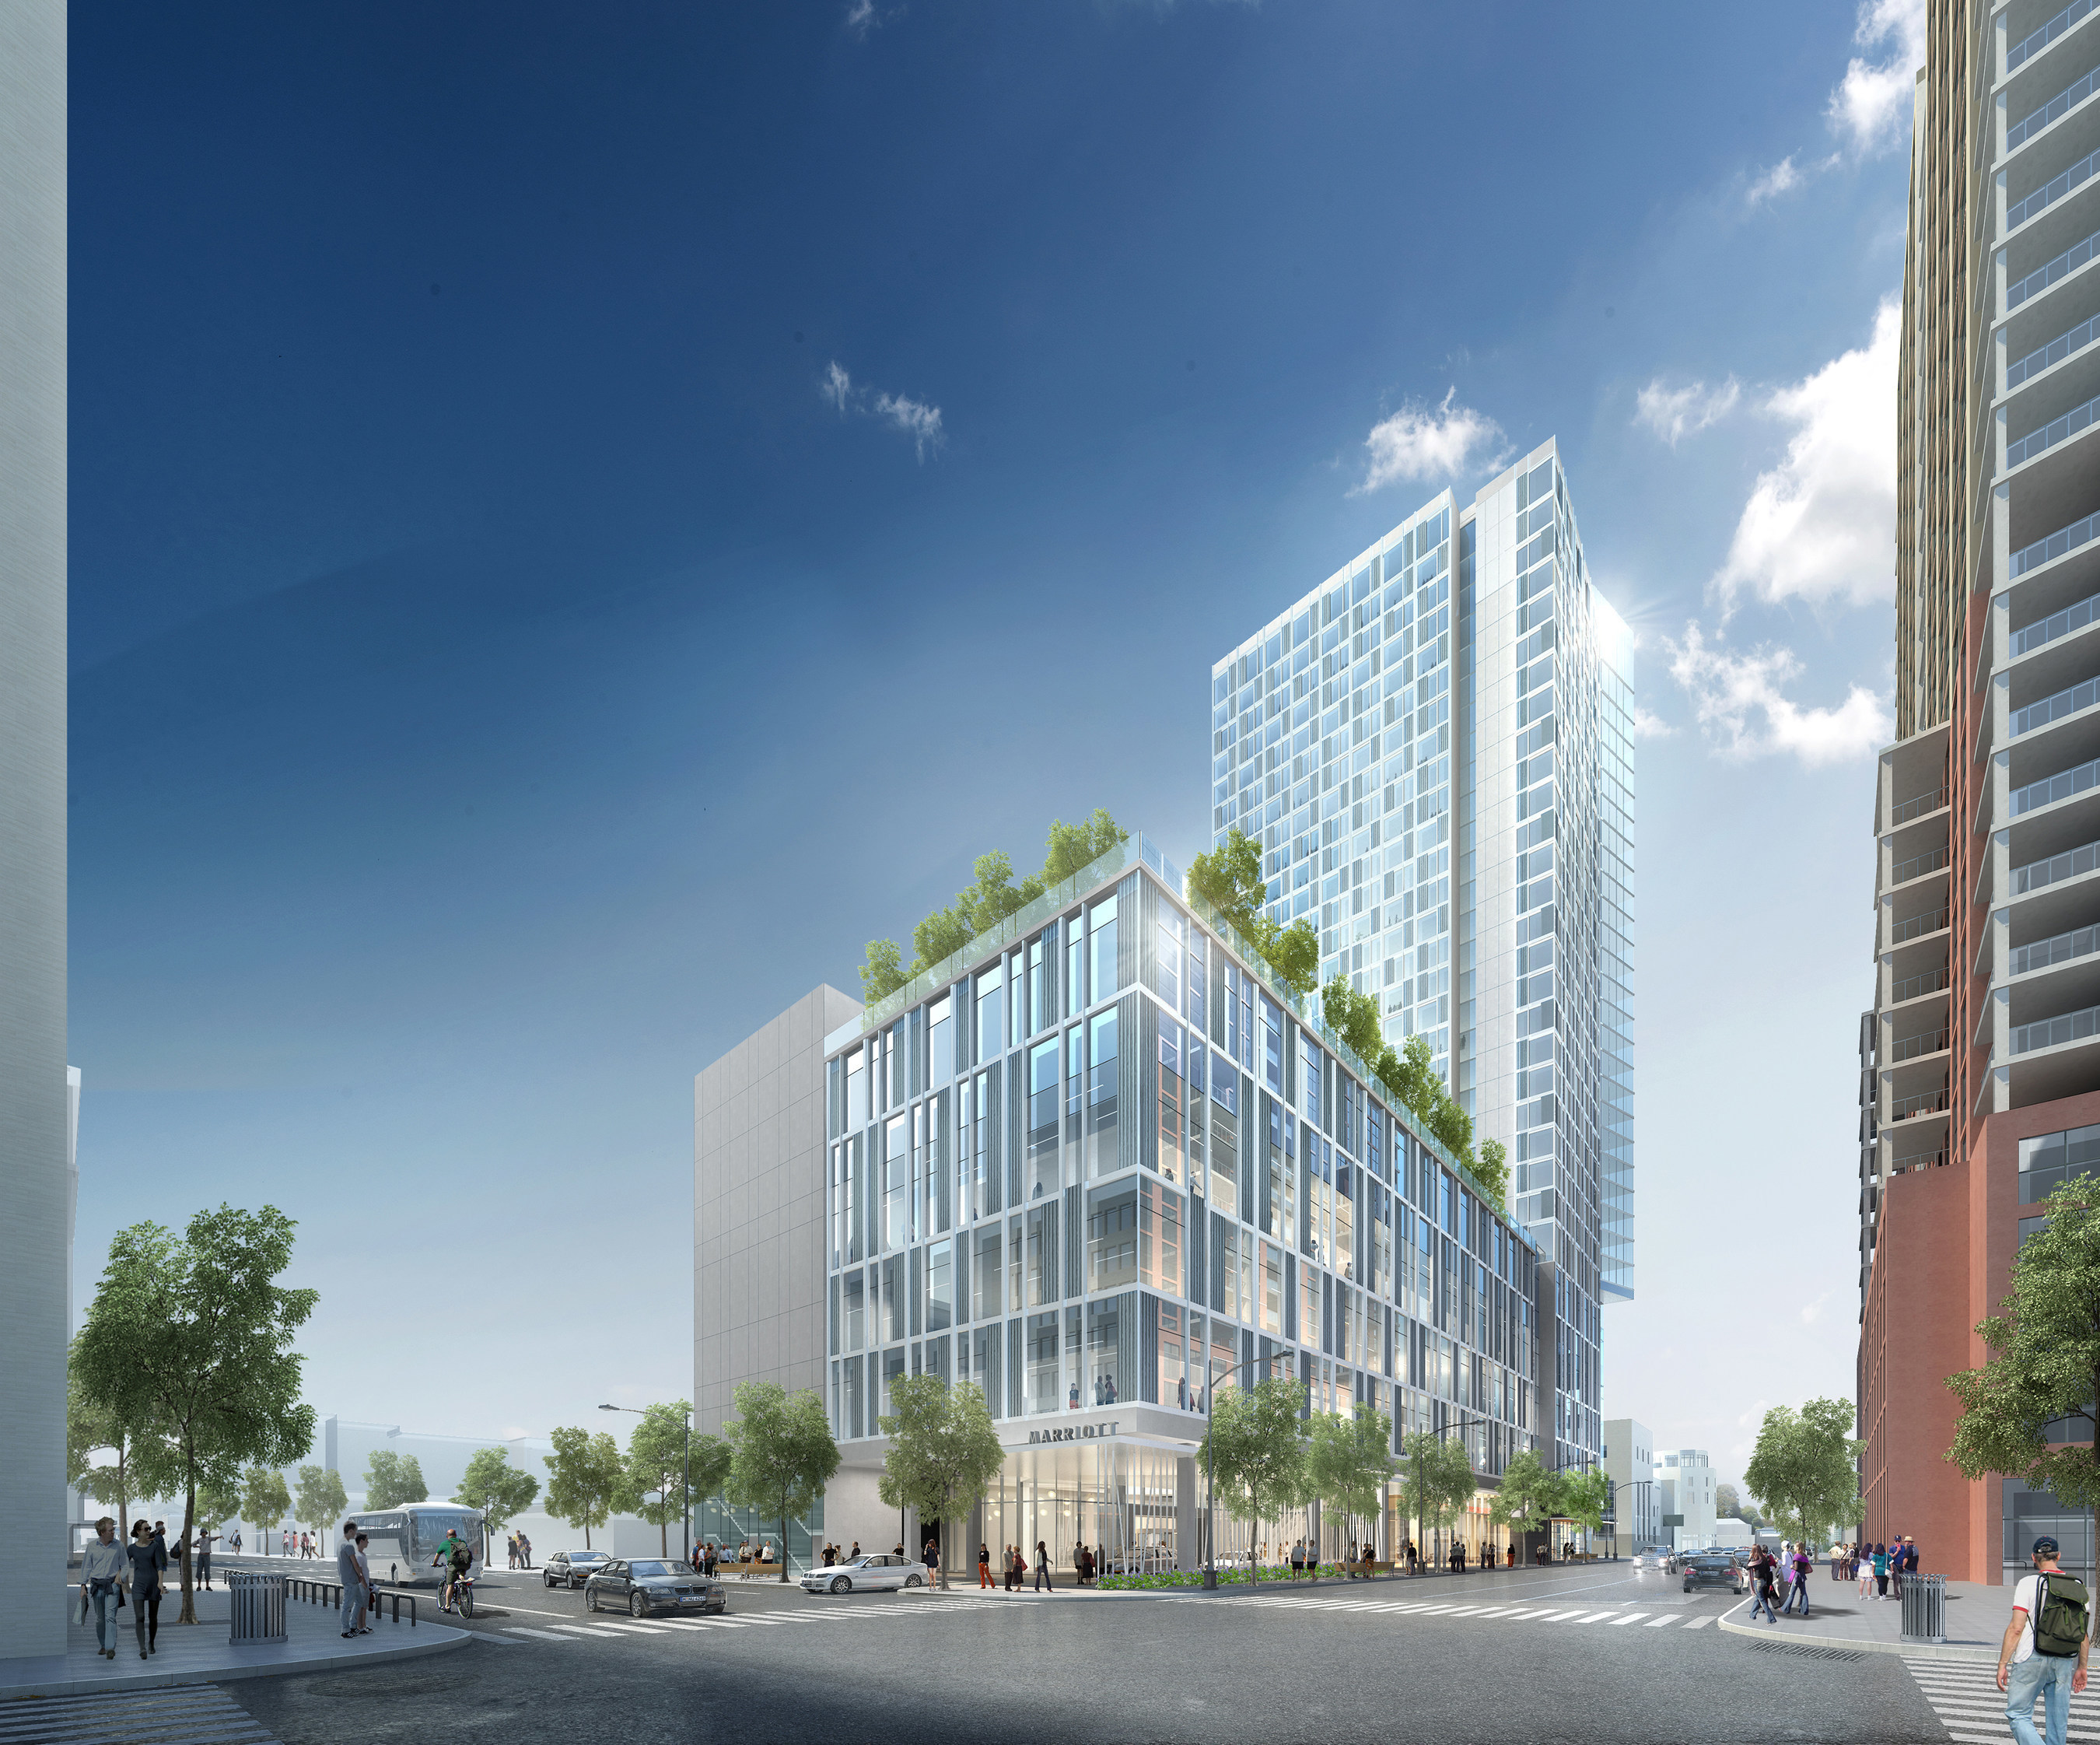 White Lodging announced it will develop a  Marriott hotel in downtown Austin adjacent to the city's convention center . The hotel is scheduled to open in 2019, and is one of two properties announced by the company Wednesday that will add around 1,000 hotel rooms to downtown Austin.